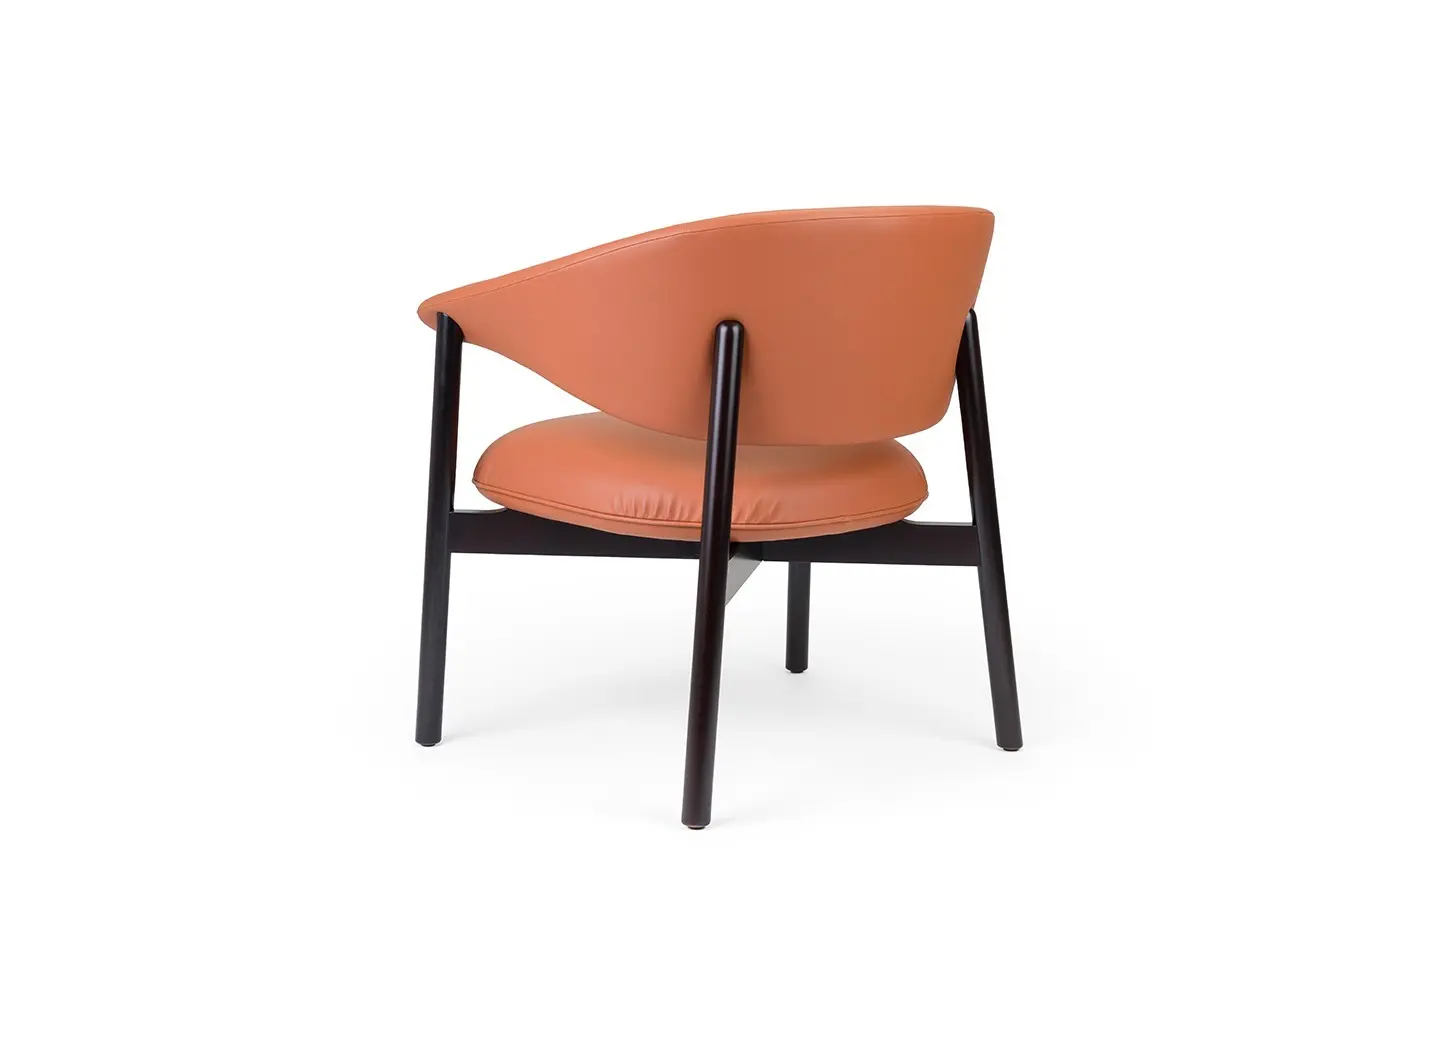 FENABEL - ROMA LOUNGE CHAIR by ARCHIRIVOLTO